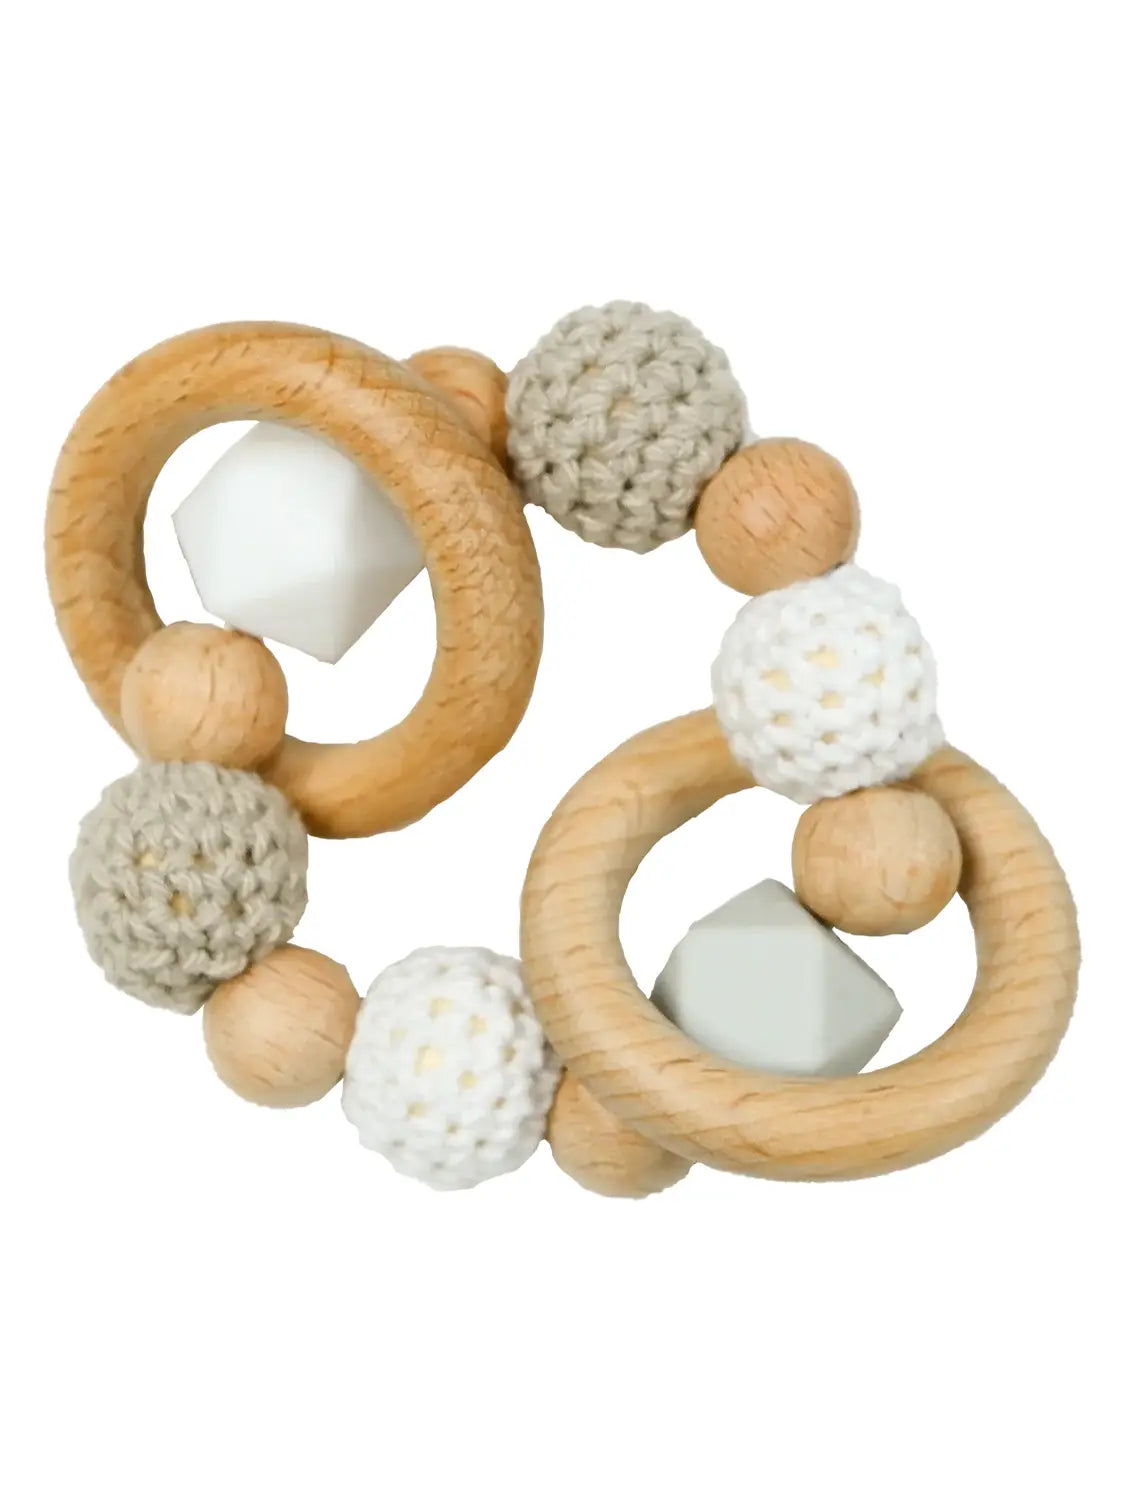 Baby Teether Toy